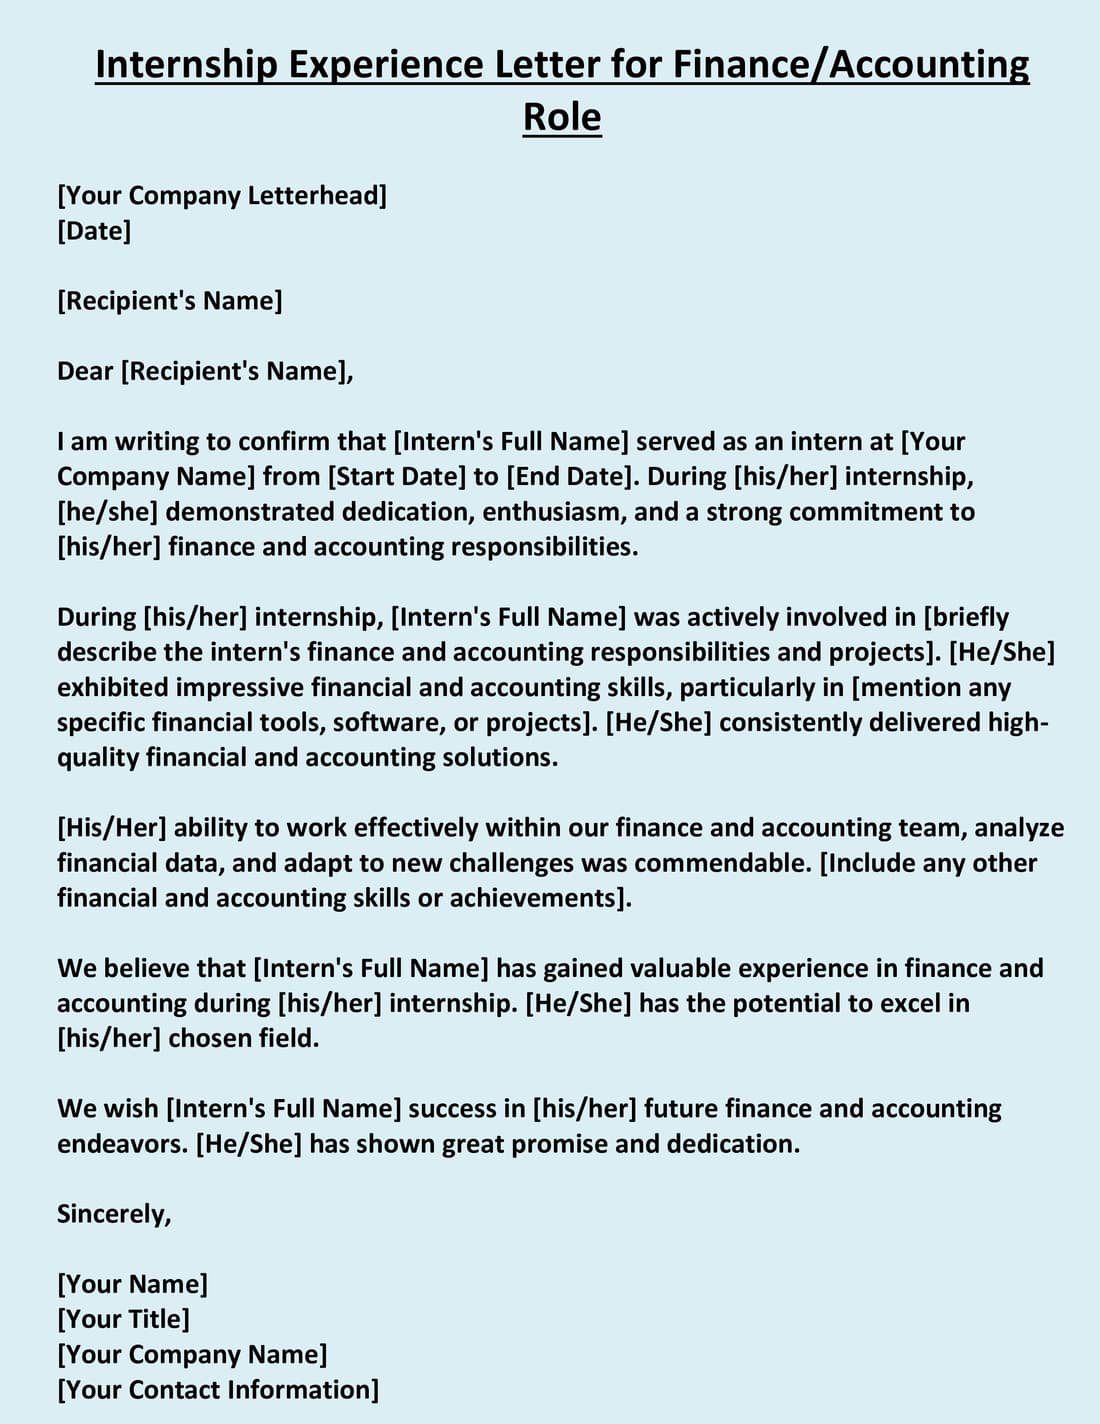 Internship Experience Letter for Finance Accounting Role